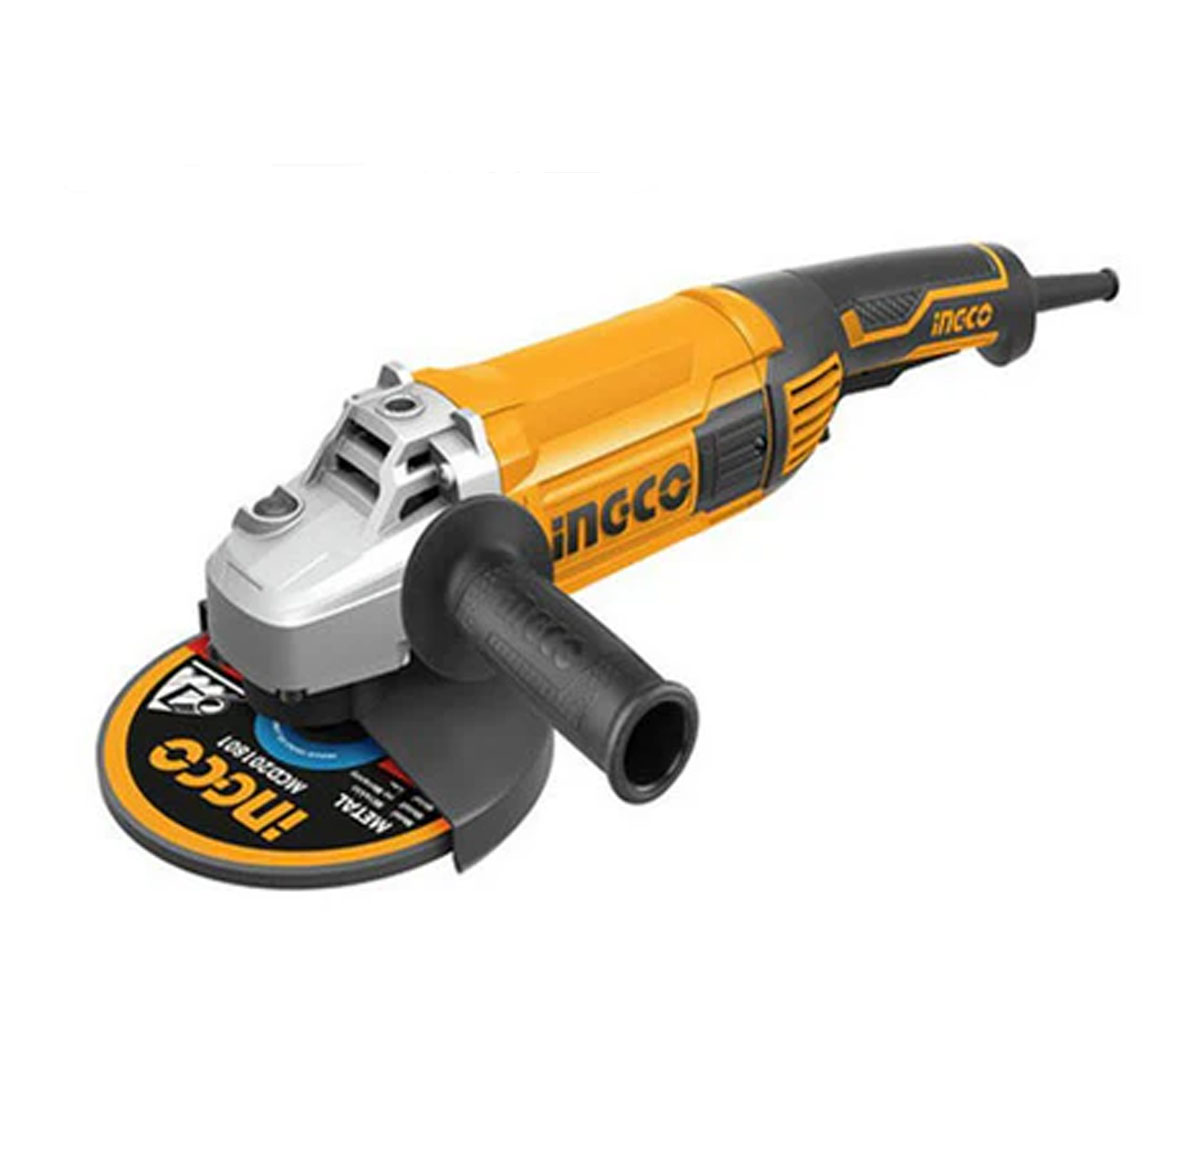 Ingco Angle grinder 2200W 230mm AG220018